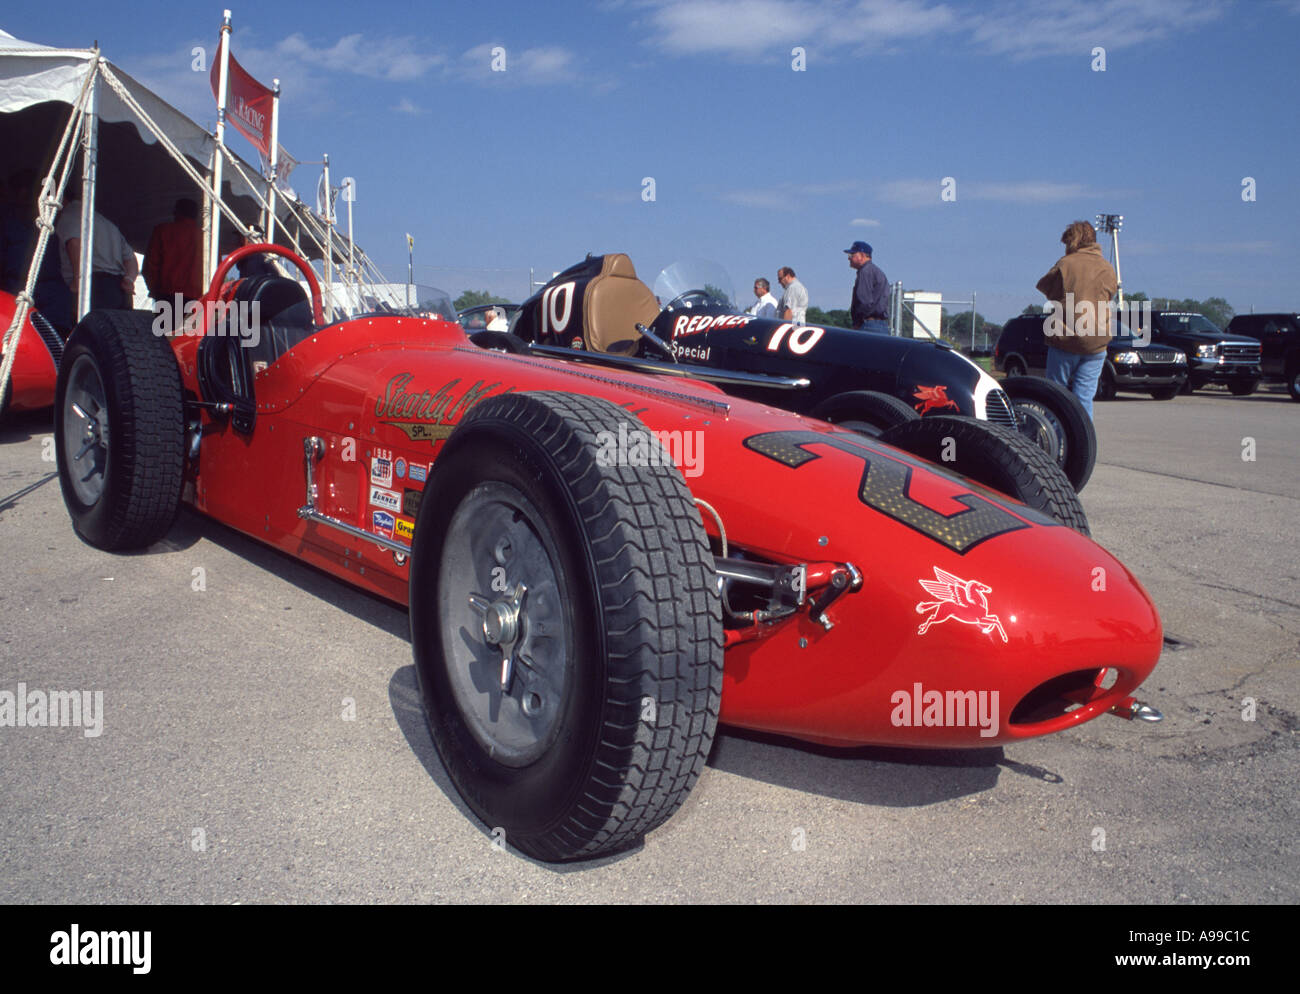 1961 Elder Roadster originally driven by Mario Andretti in the paddock at the Milwaukee Mile 2003 Stock Photo